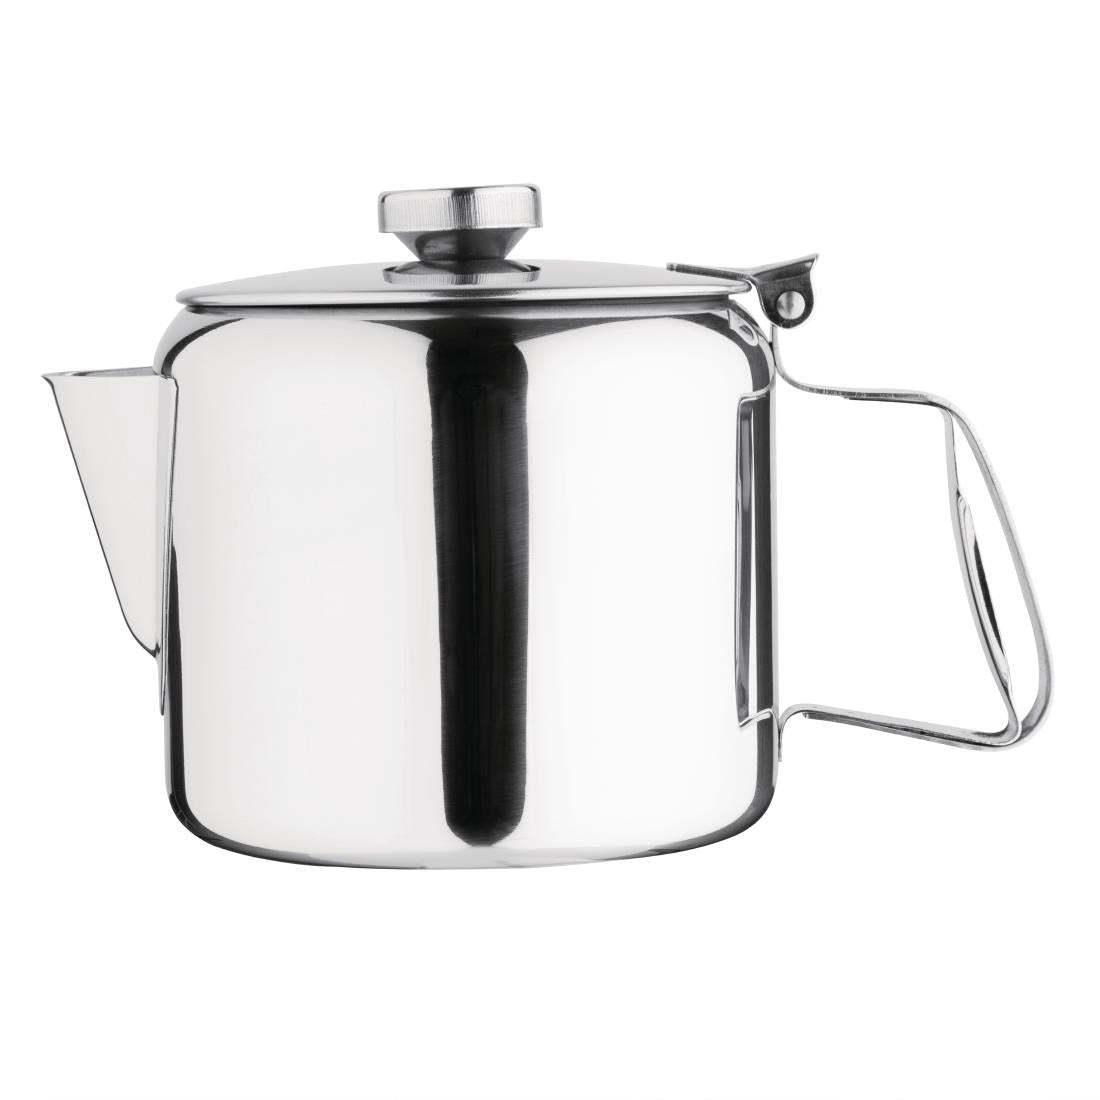 K679 Olympia Concorde Stainless Steel Teapot 850ml